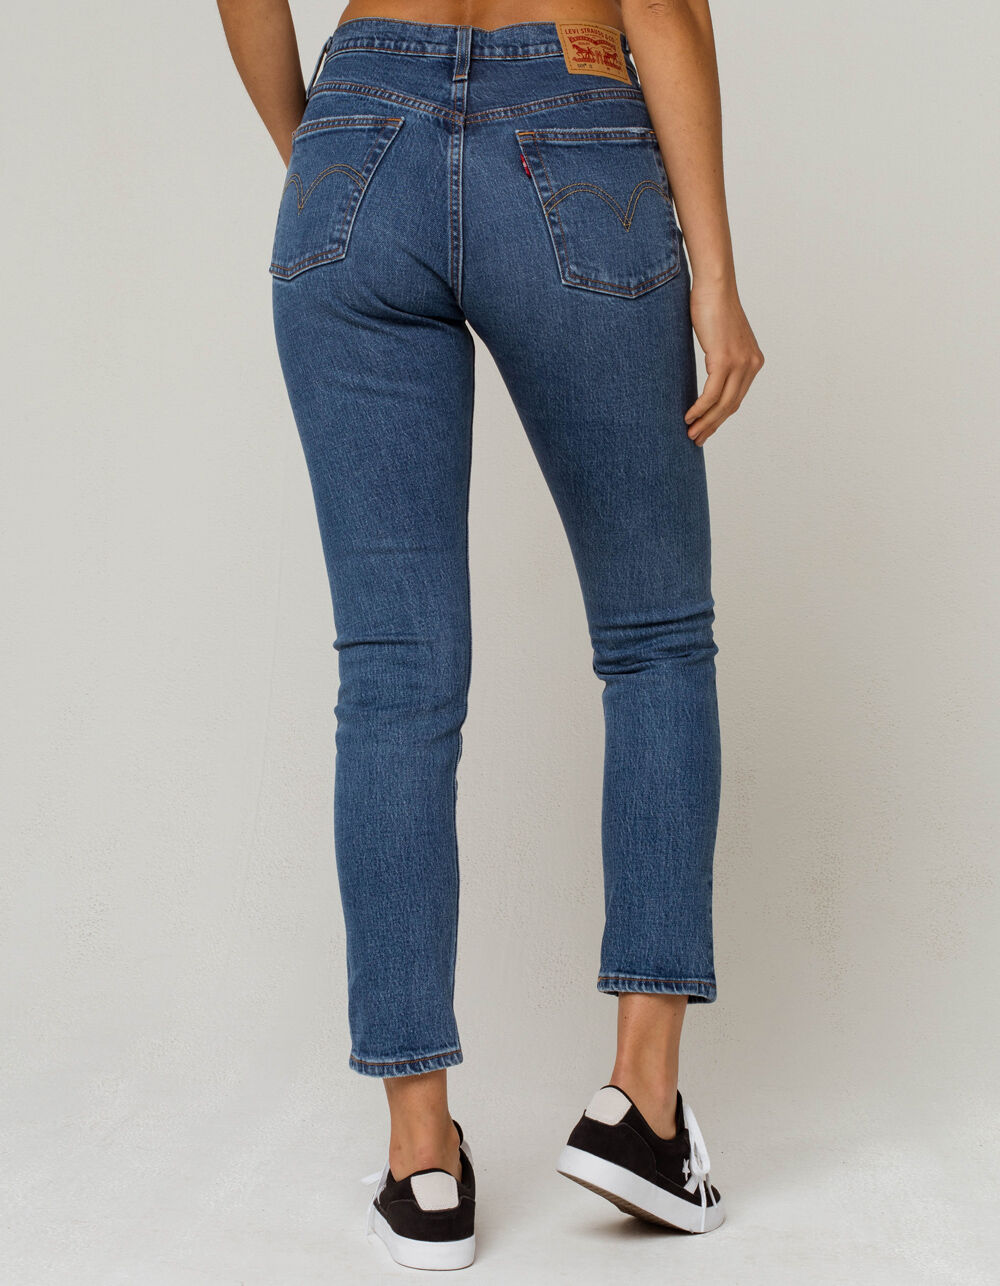 LEVI'S 501 Womens Skinny Jeans image number 3